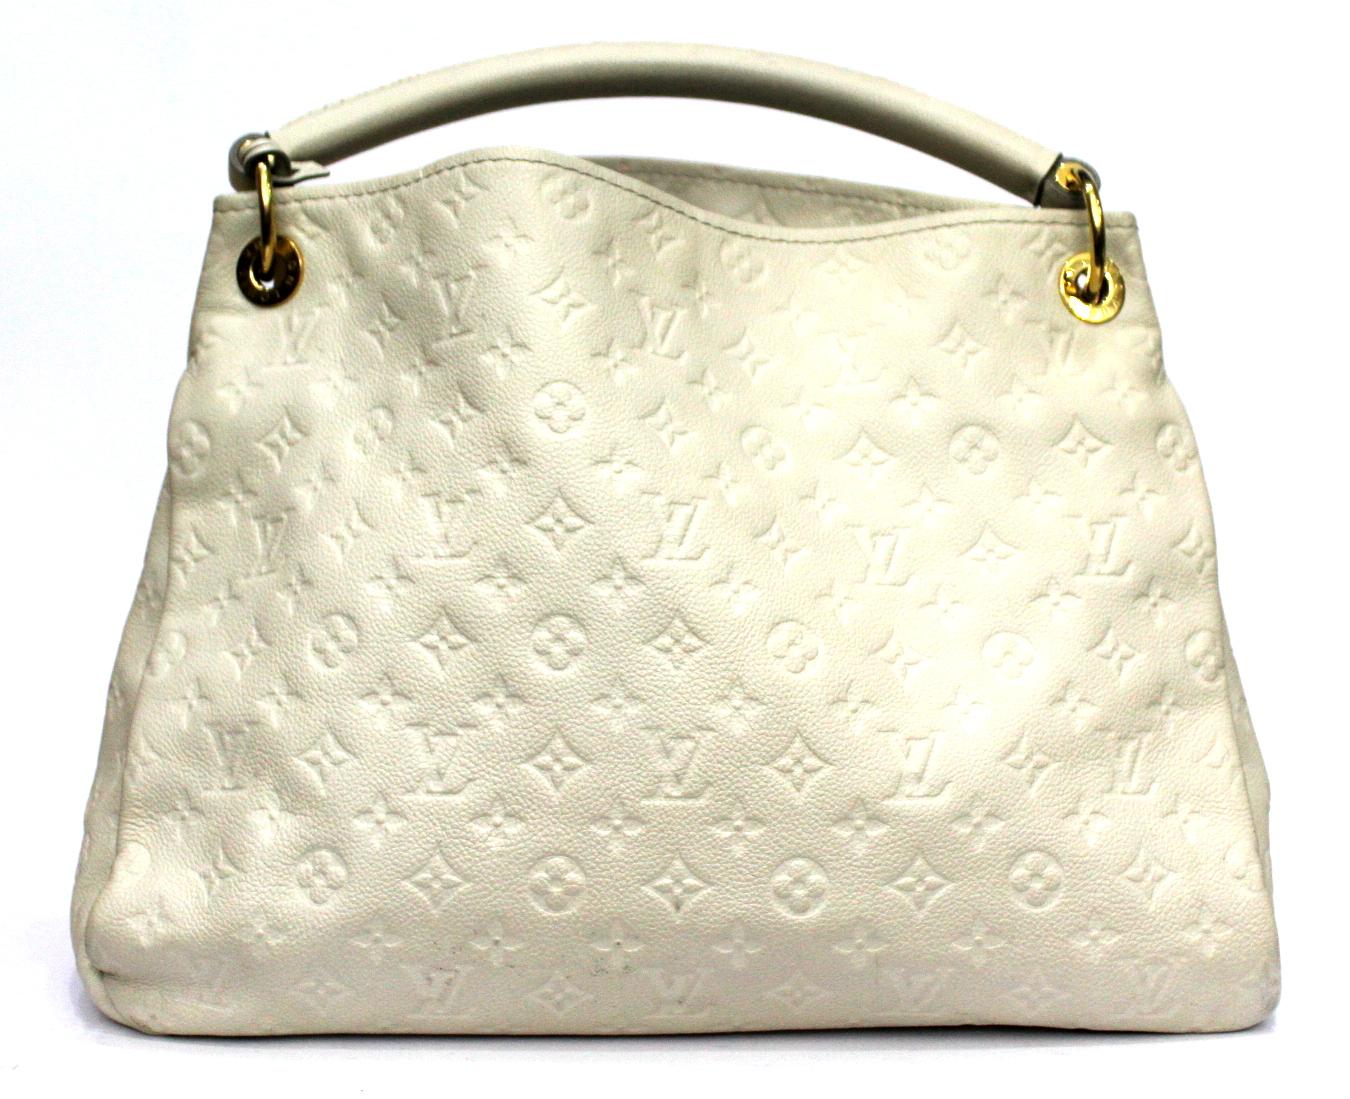 The Artsy ML bag Artsy cream-colored MM bag, made of a soft mix of Monogram Empreinte leather embossed in bas-relief and smooth cowhide, is inspired by a sophisticated casual chic style.
Equipped with a fantastic braided handle.
The model,